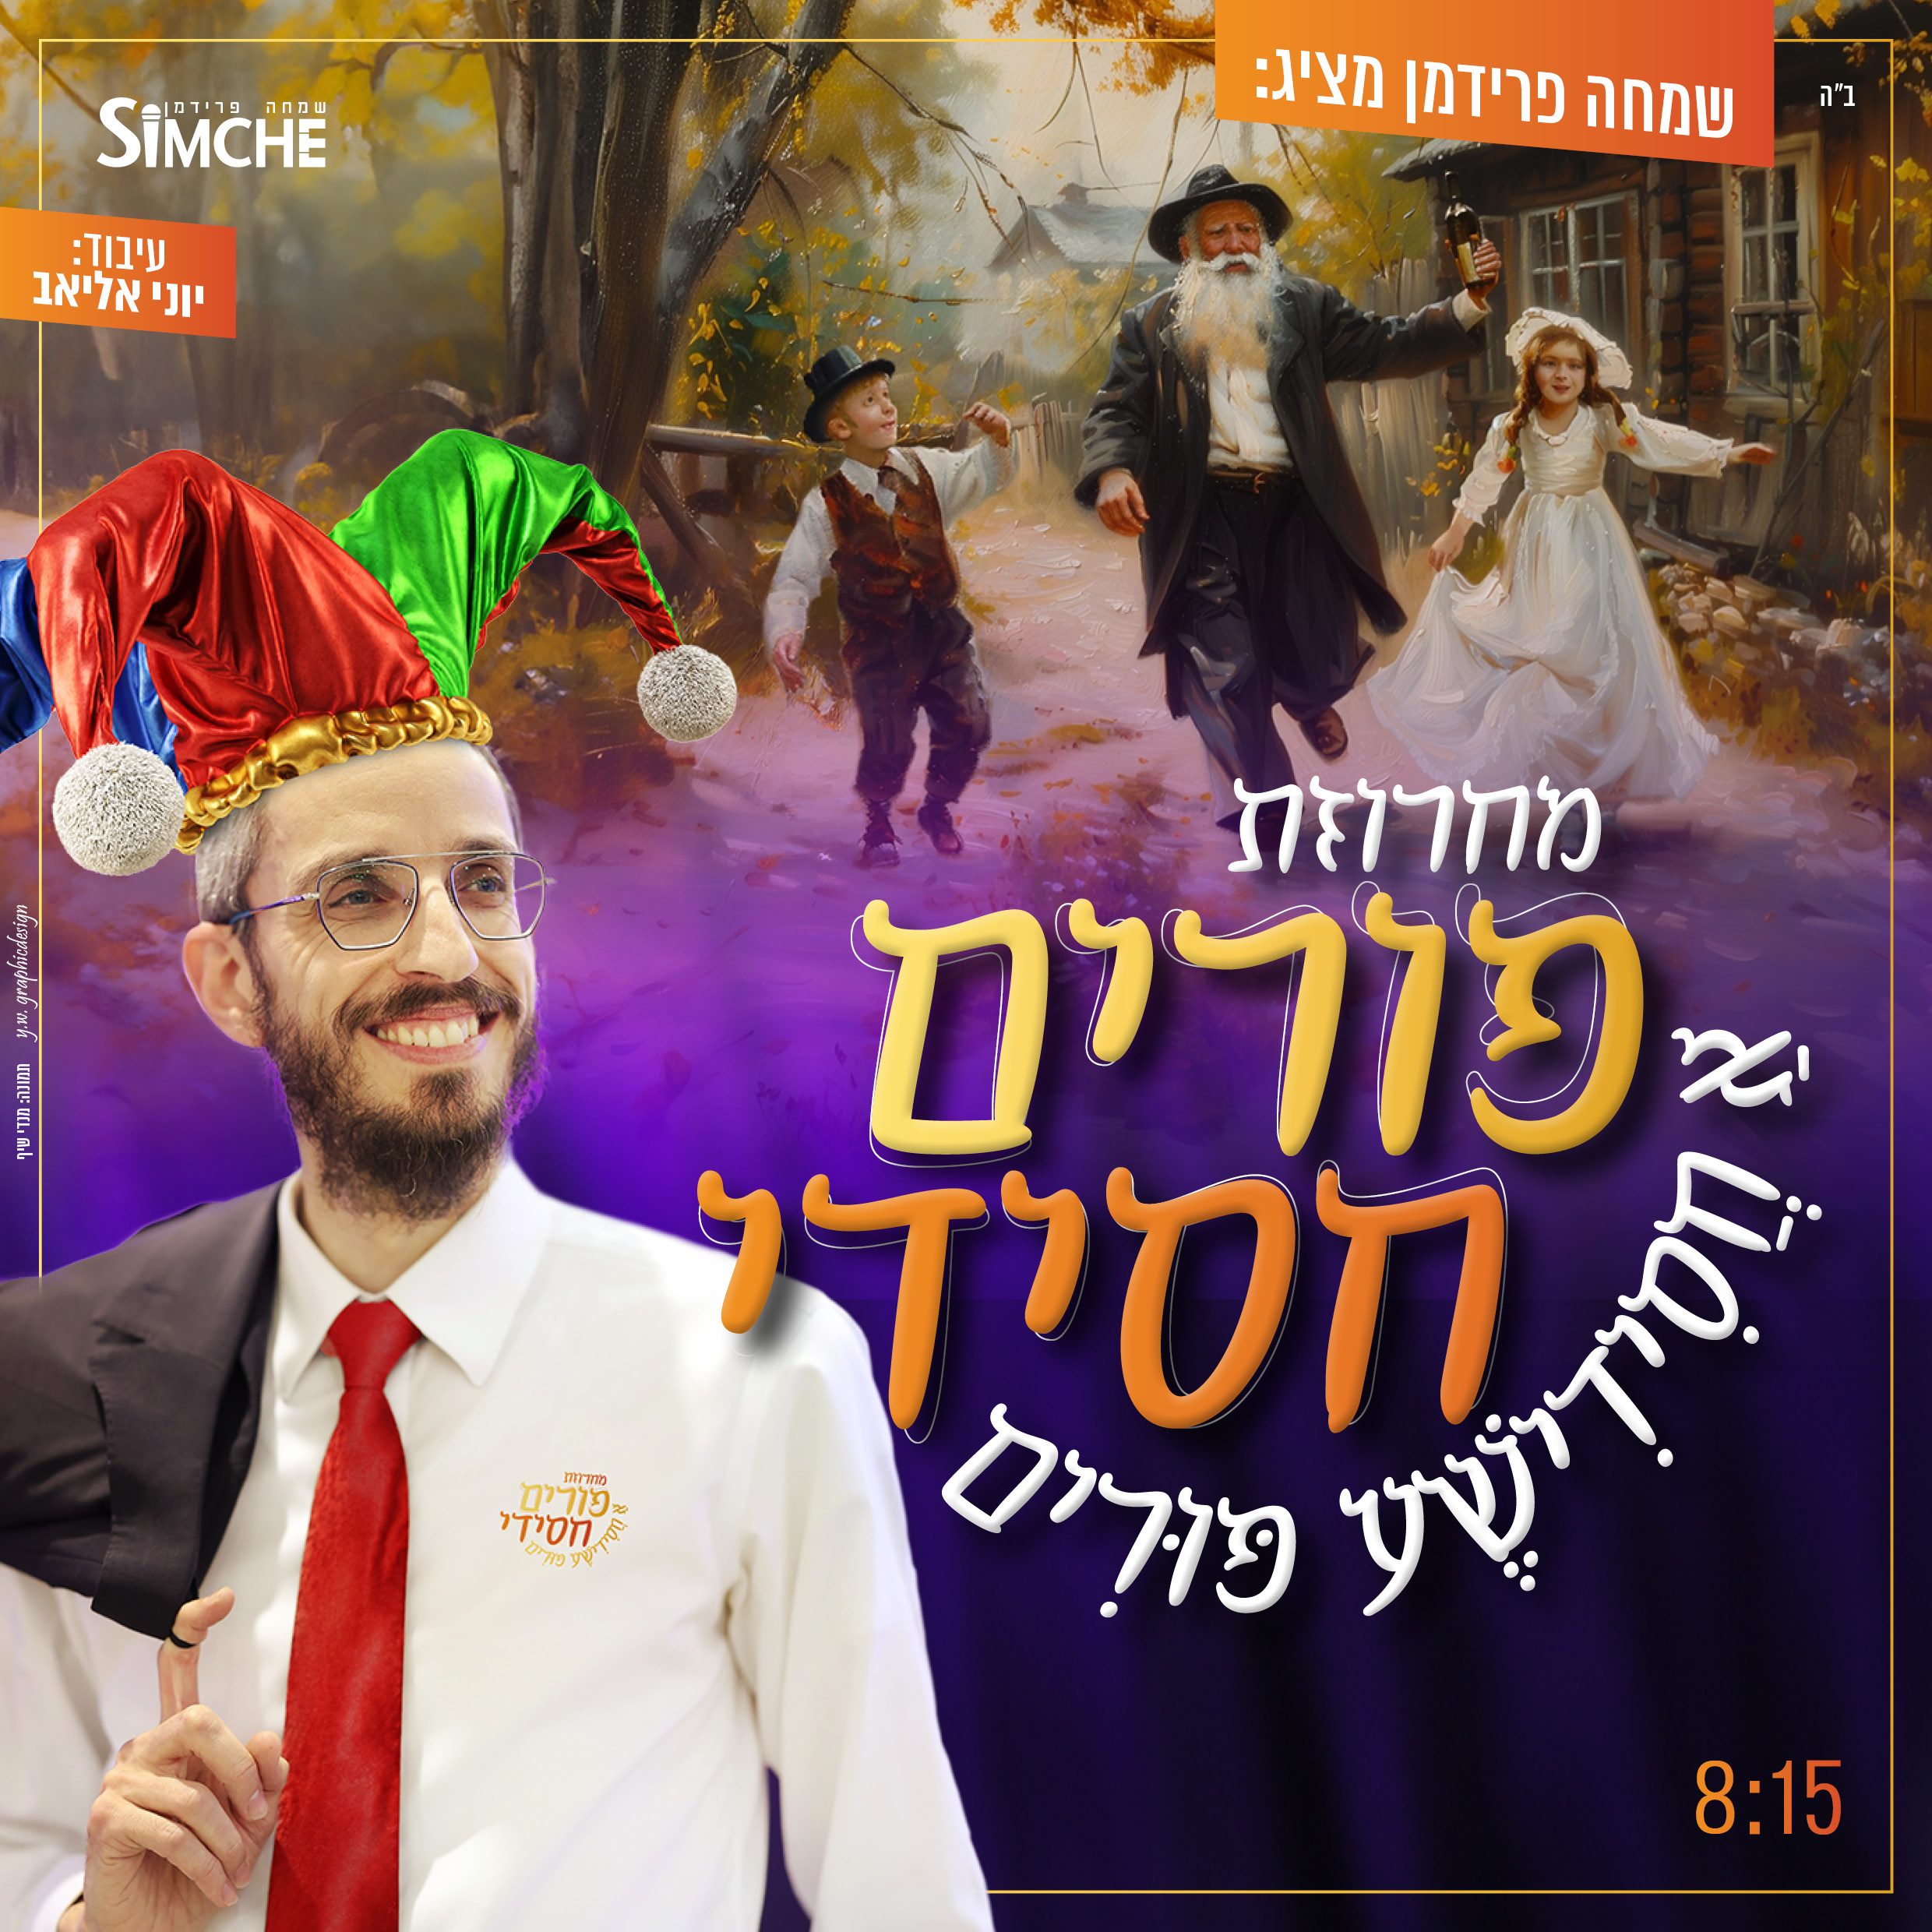 Simche Friedman Releases Chassidic Purim Medley